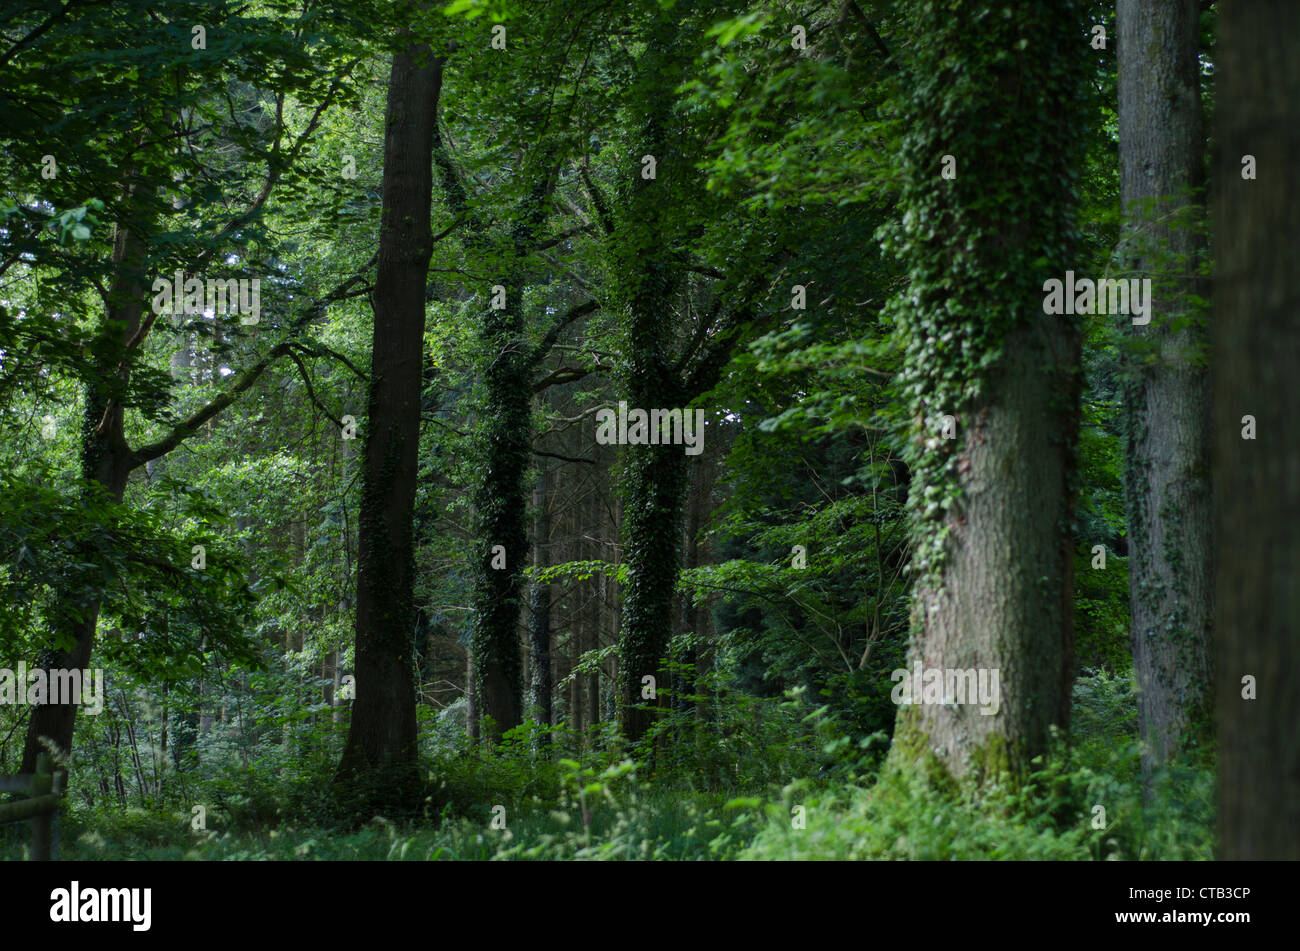 Mixed forest in an English park. Stock Photo